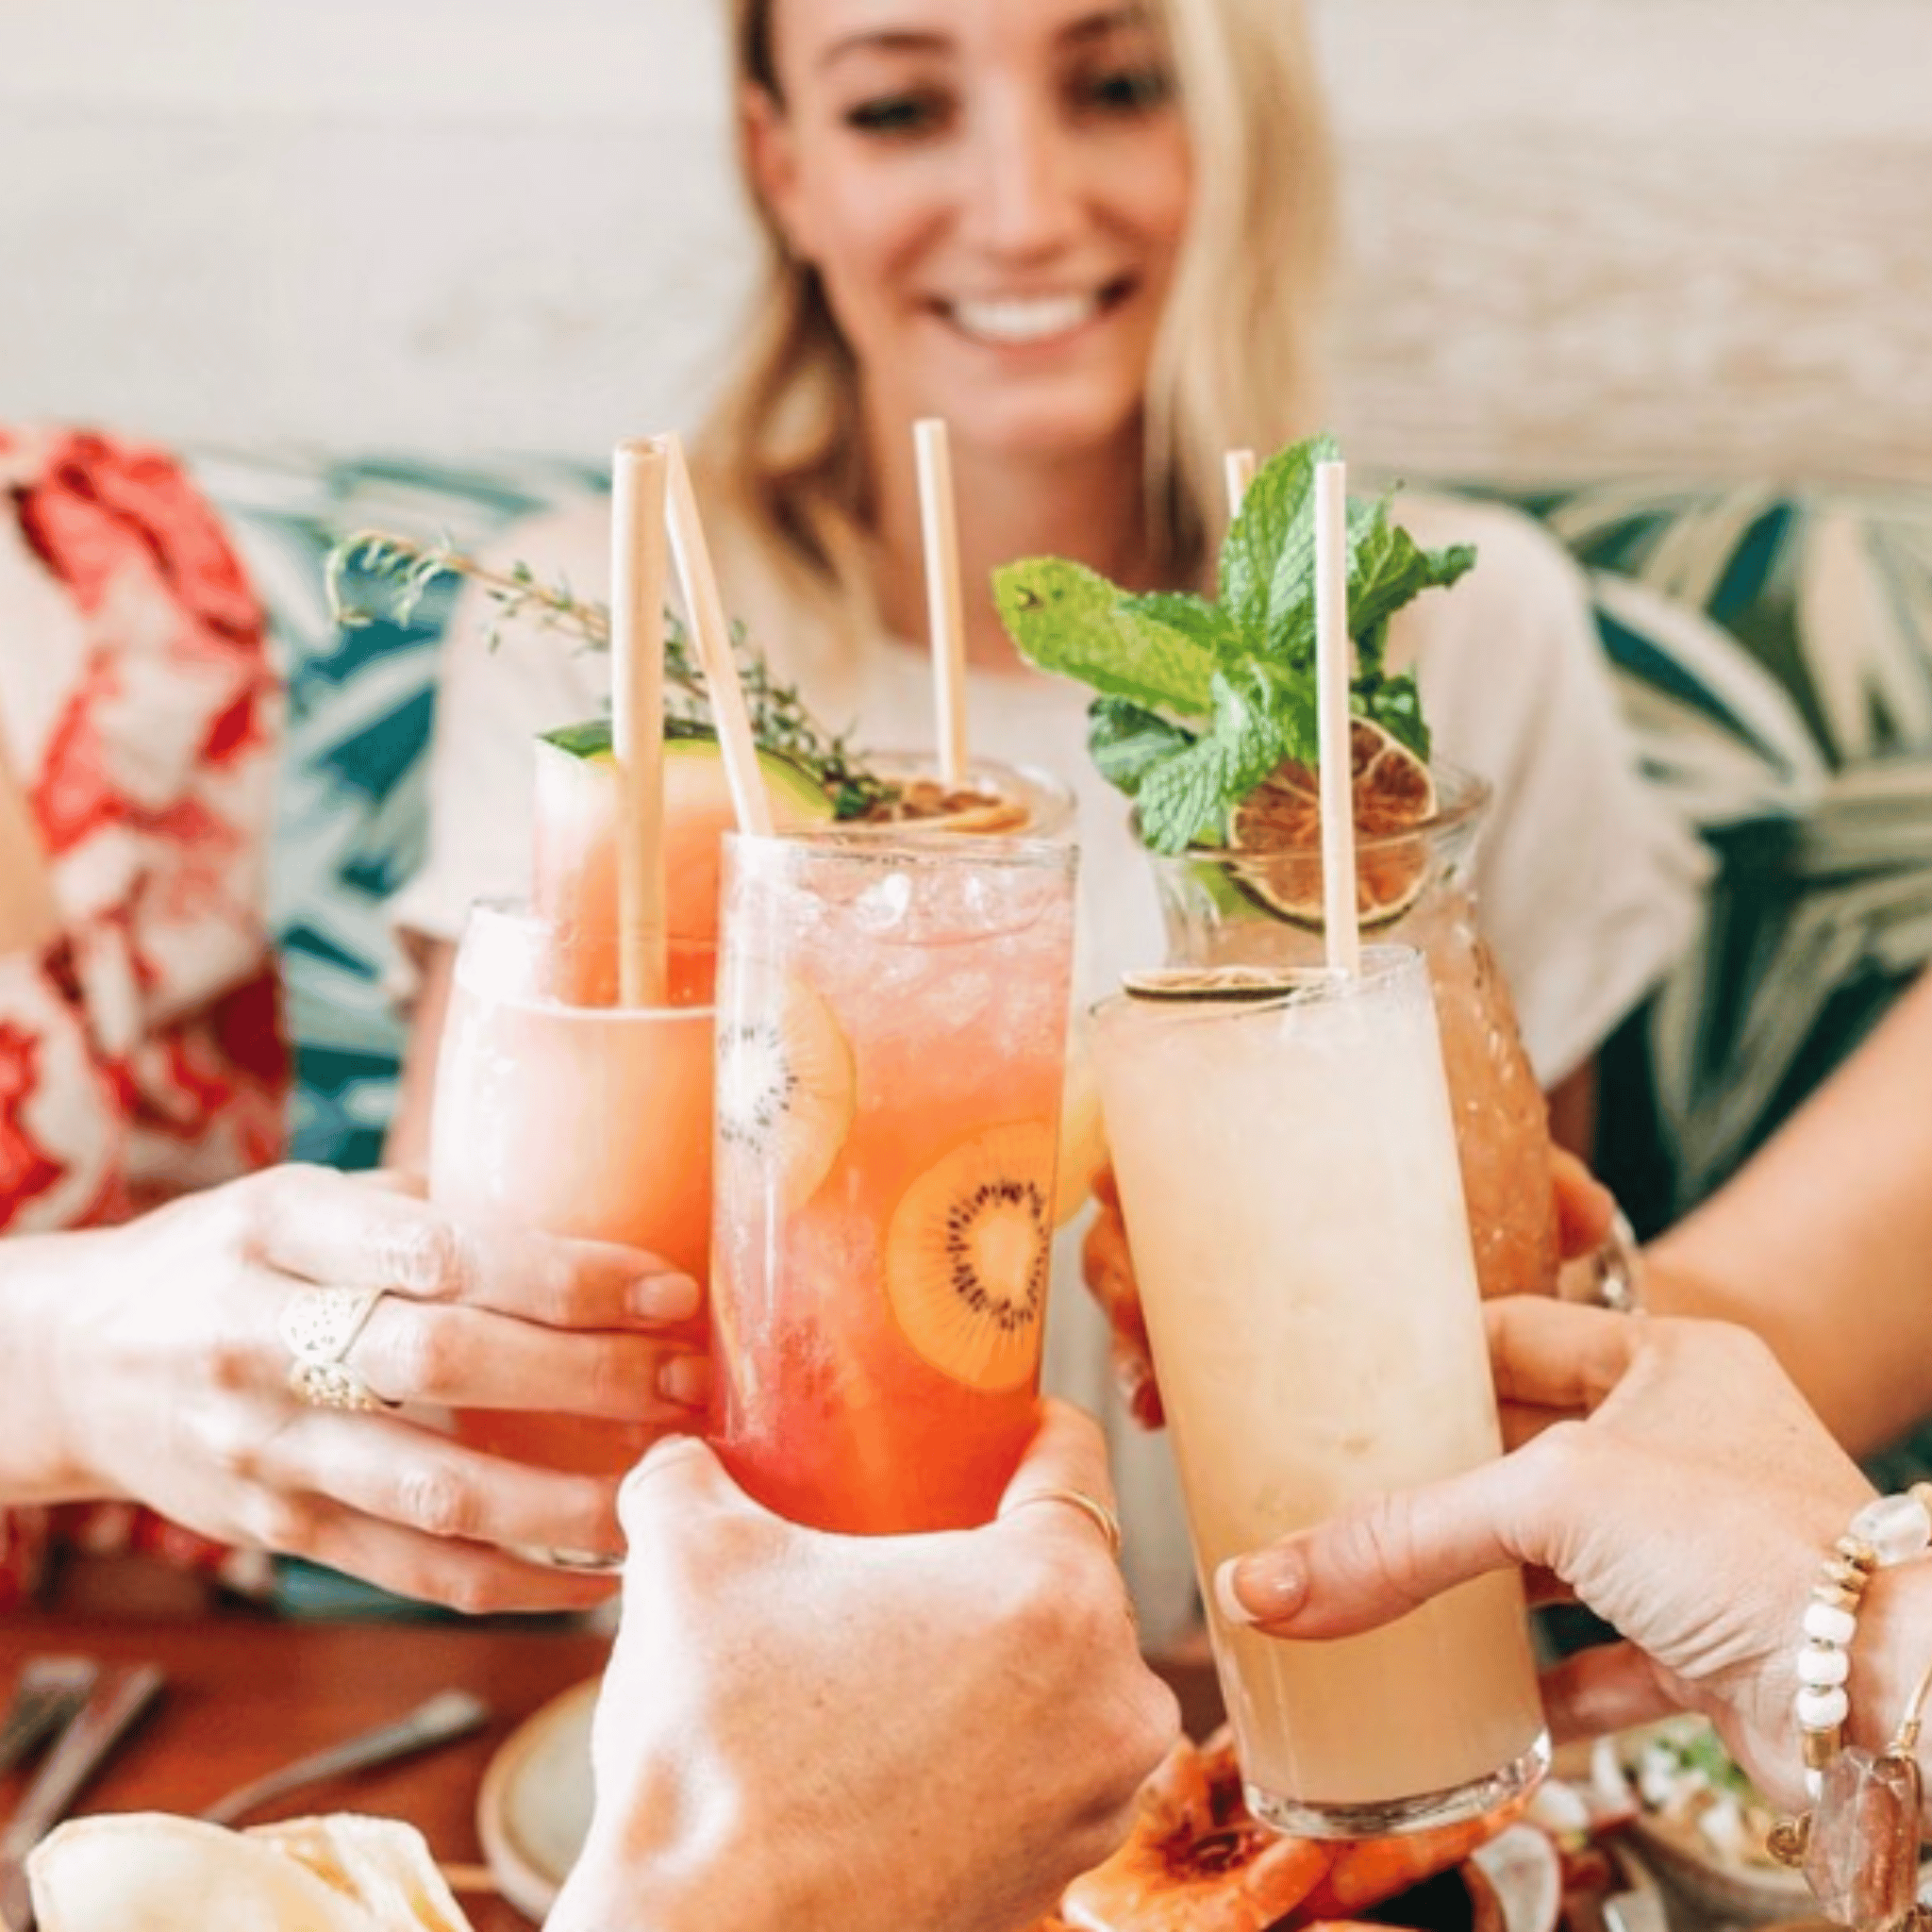 Four friends raise their cocktails in a cheerful toast. Each drink is garnished with fresh fruit or herbs, featuring tall skinny reed straws for an eco-friendly touch. The background includes a person smiling and tropical upholstery, contributing to the festive and relaxed atmosphere.